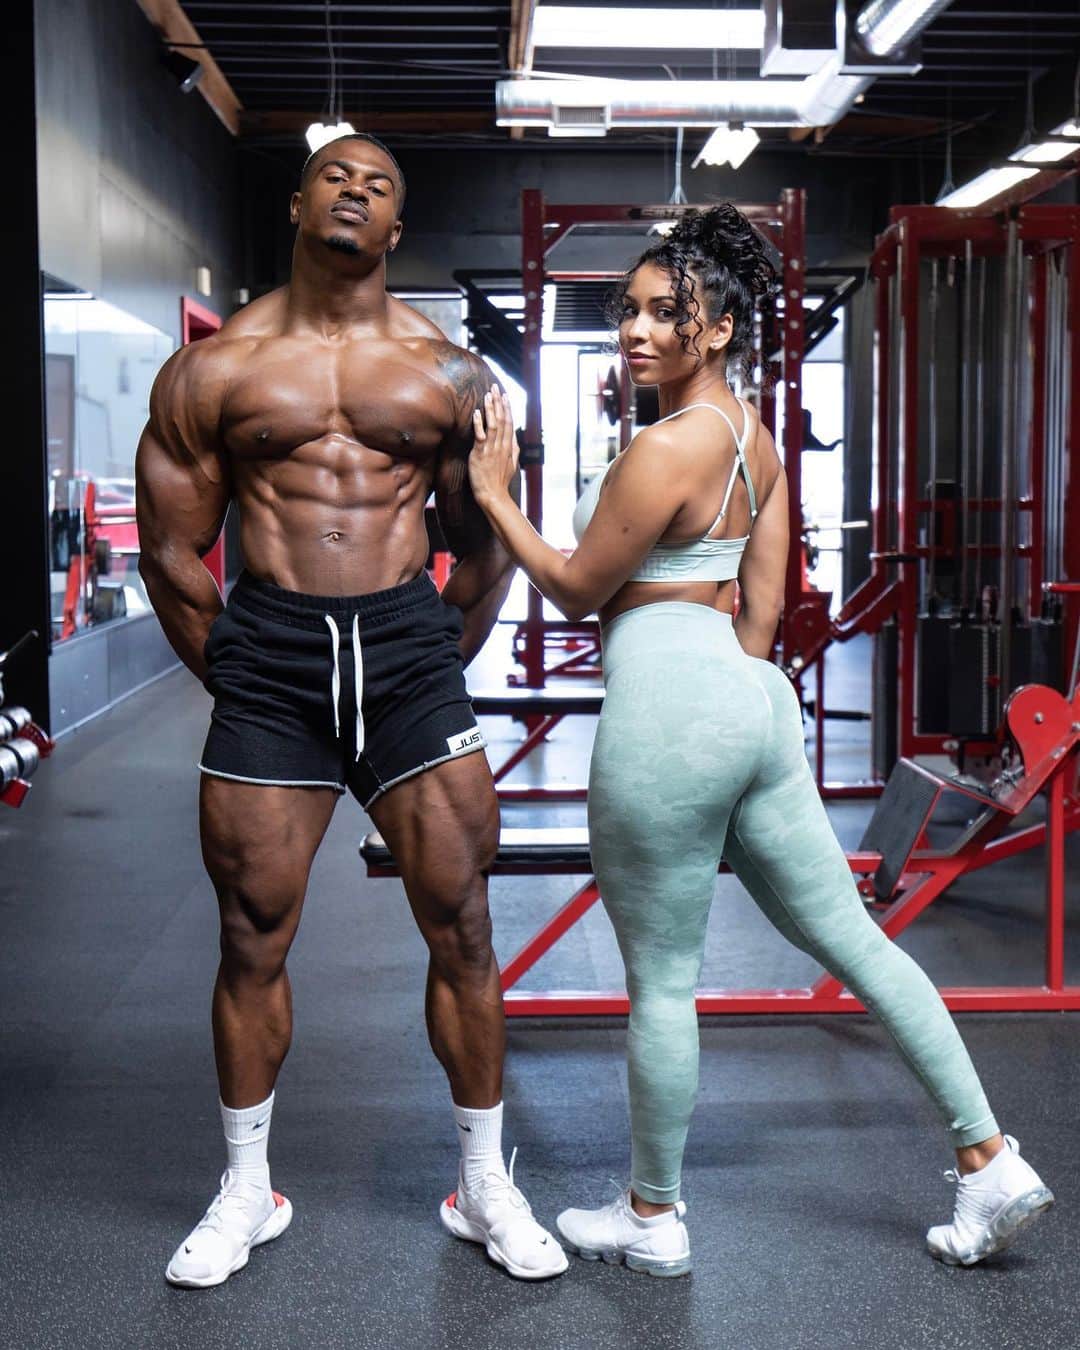 Simeon Pandaさんのインスタグラム写真 - (Simeon PandaInstagram)「NEW vid with @chanelcocobrown 3 Exercises to Build Bigger Quads 👉🏾LINK IN MY BIO ⁣⁣⁣⁣👈🏾 Like, comment and share when you’ve seen it 👊🏾 Make sure you’re subscribed to my channel for part 2 of this vid, where Chanel will take me through a glutes workout!⁣ ⁣ 🎥 YouTube.com/simeonpanda⁣⁣⁣⁣⁣⁣ 🎥 YouTube.com/simeonpanda⁣⁣⁣⁣⁣⁣ 🎥 YouTube.com/simeonpanda ⁣⁣⁣⁣⁣⁣ ⁣⁣⁣⁣⁣⁣ 📲 You can download my full training routines at SIMEONPANDA.COM⁣⁣⁣⁣⁣⁣⁣⁣ ⁣⁣ ⁣⁣ 🎥 by @jakecotreau ⁣⁣⁣⁣⁣⁣ ⁣⁣ #simeonpanda #squats #legdayroutine」6月1日 0時01分 - simeonpanda